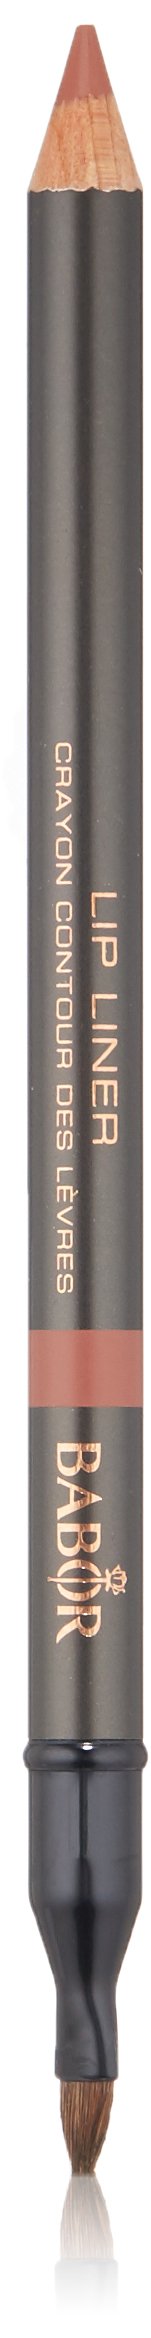 Babor Age ID Lip Liner, 01 nude